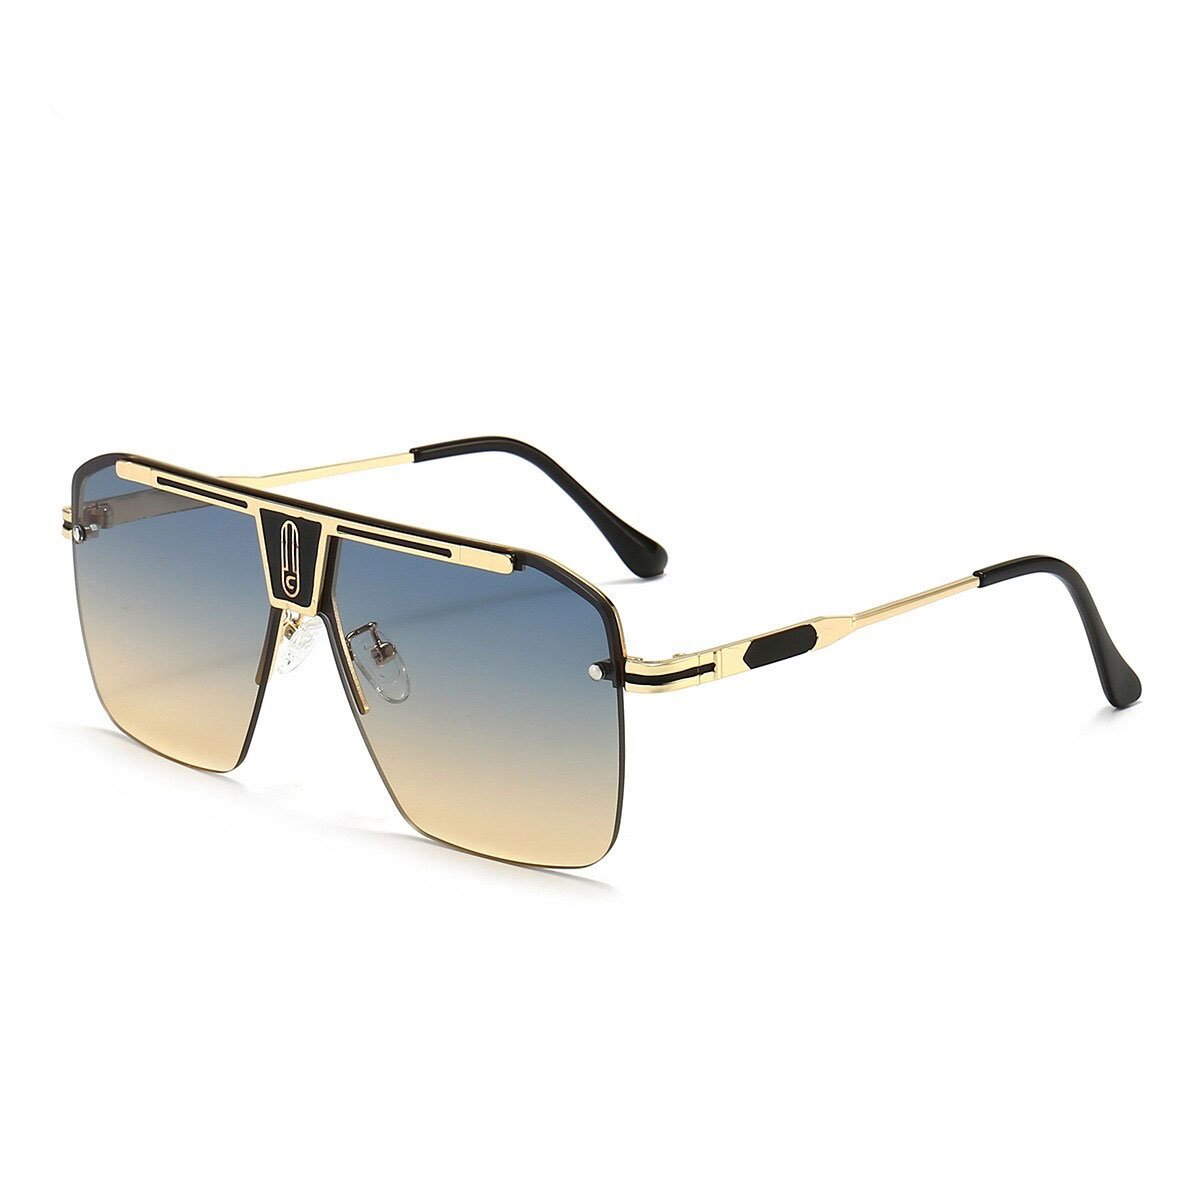 New Classic Square Metal Frame Sunglasses For Unisex-Unique and Classy